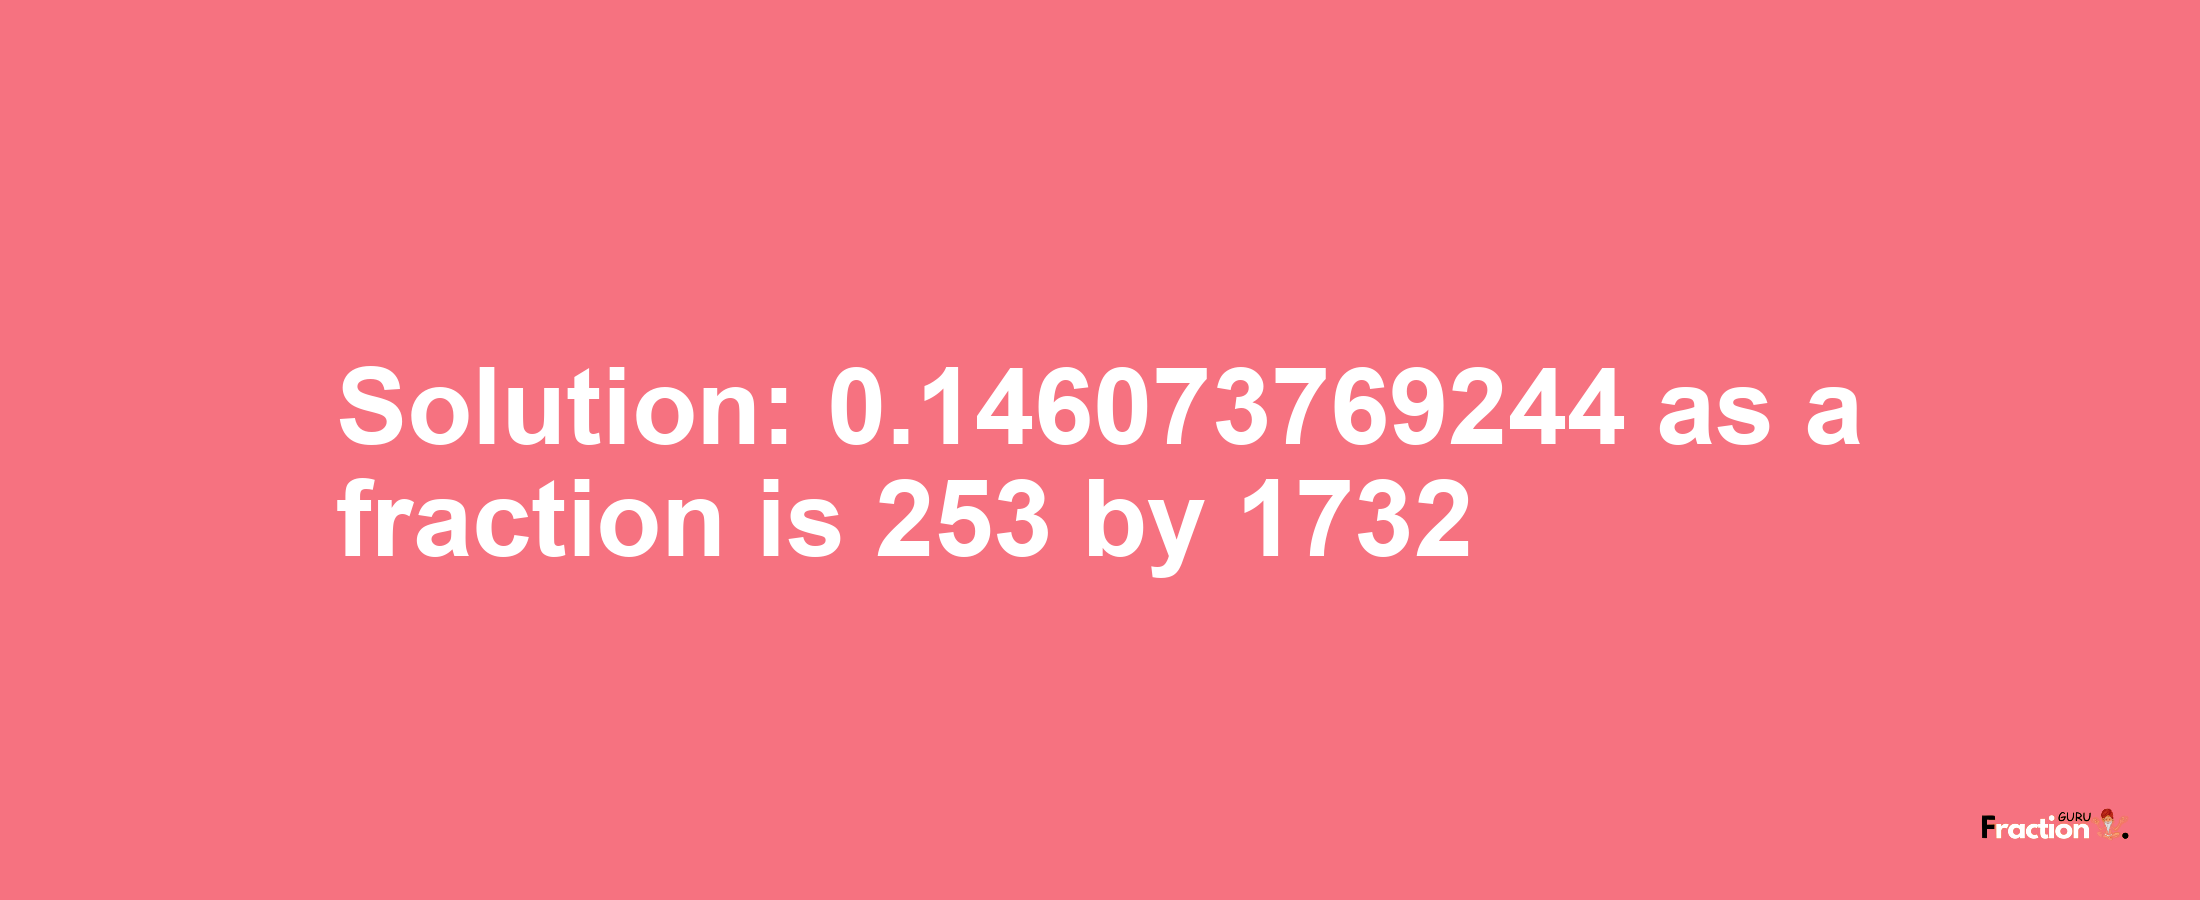 Solution:0.146073769244 as a fraction is 253/1732